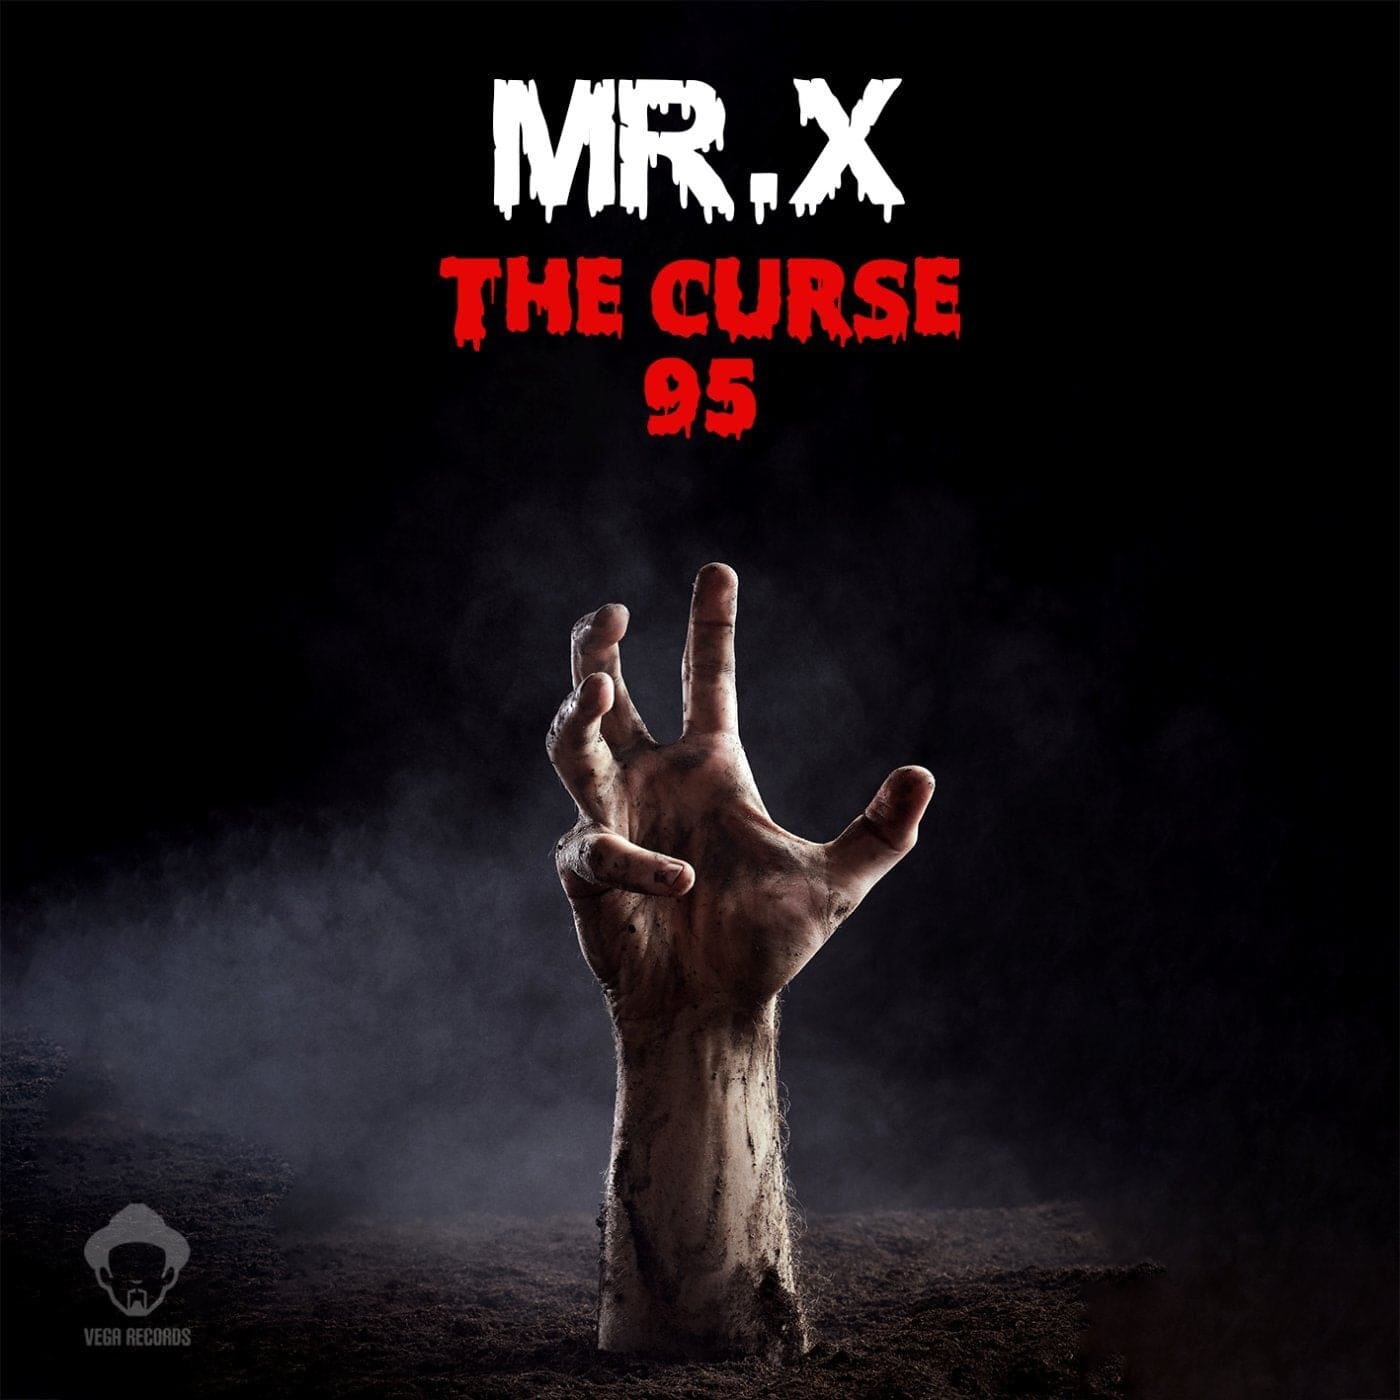 Download Mr. X - The Curse on Electrobuzz